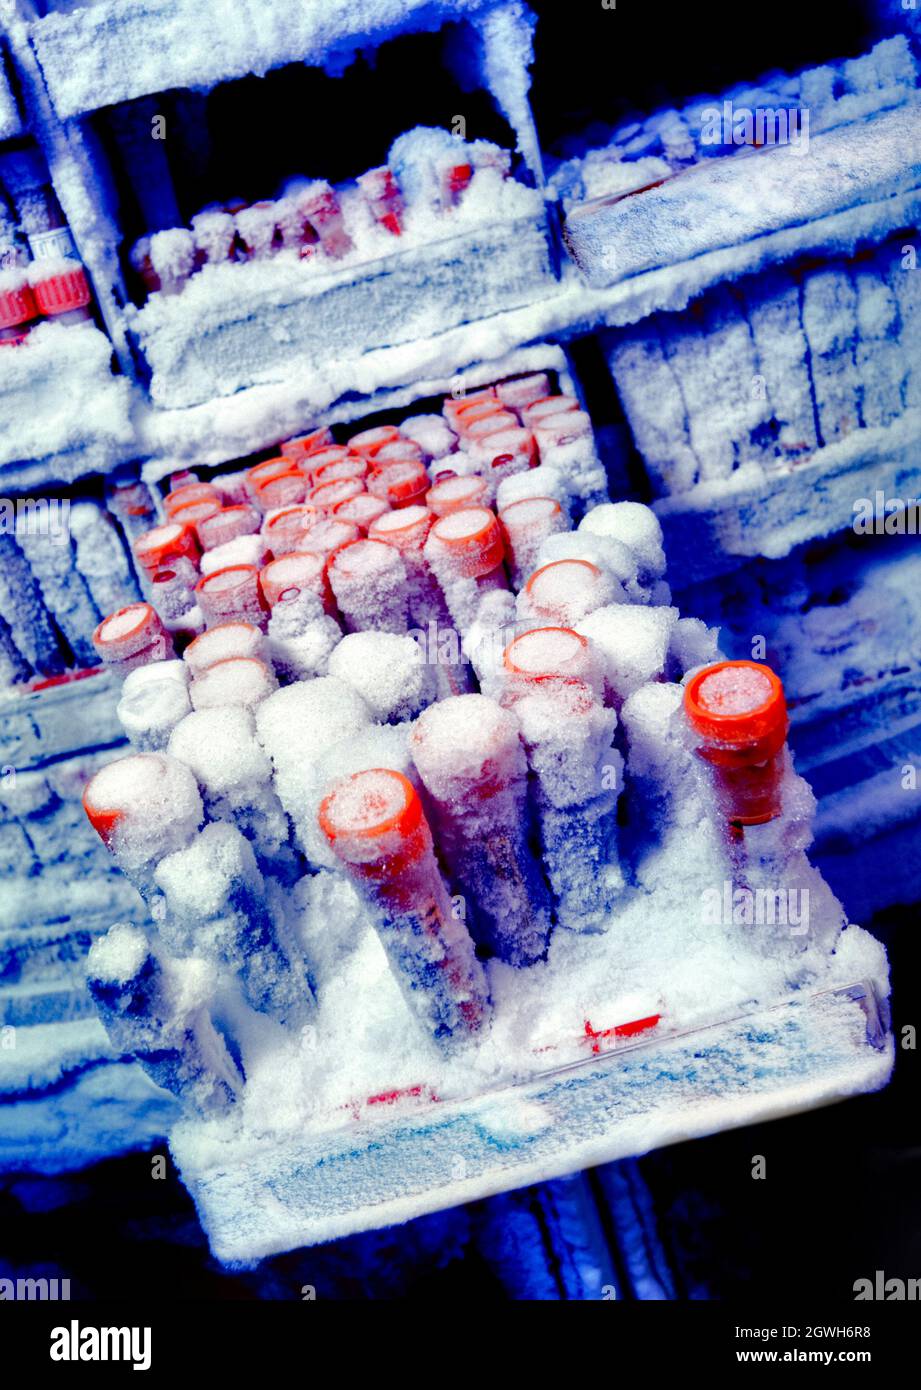 Medical research blood samples in freezer Stock Photo